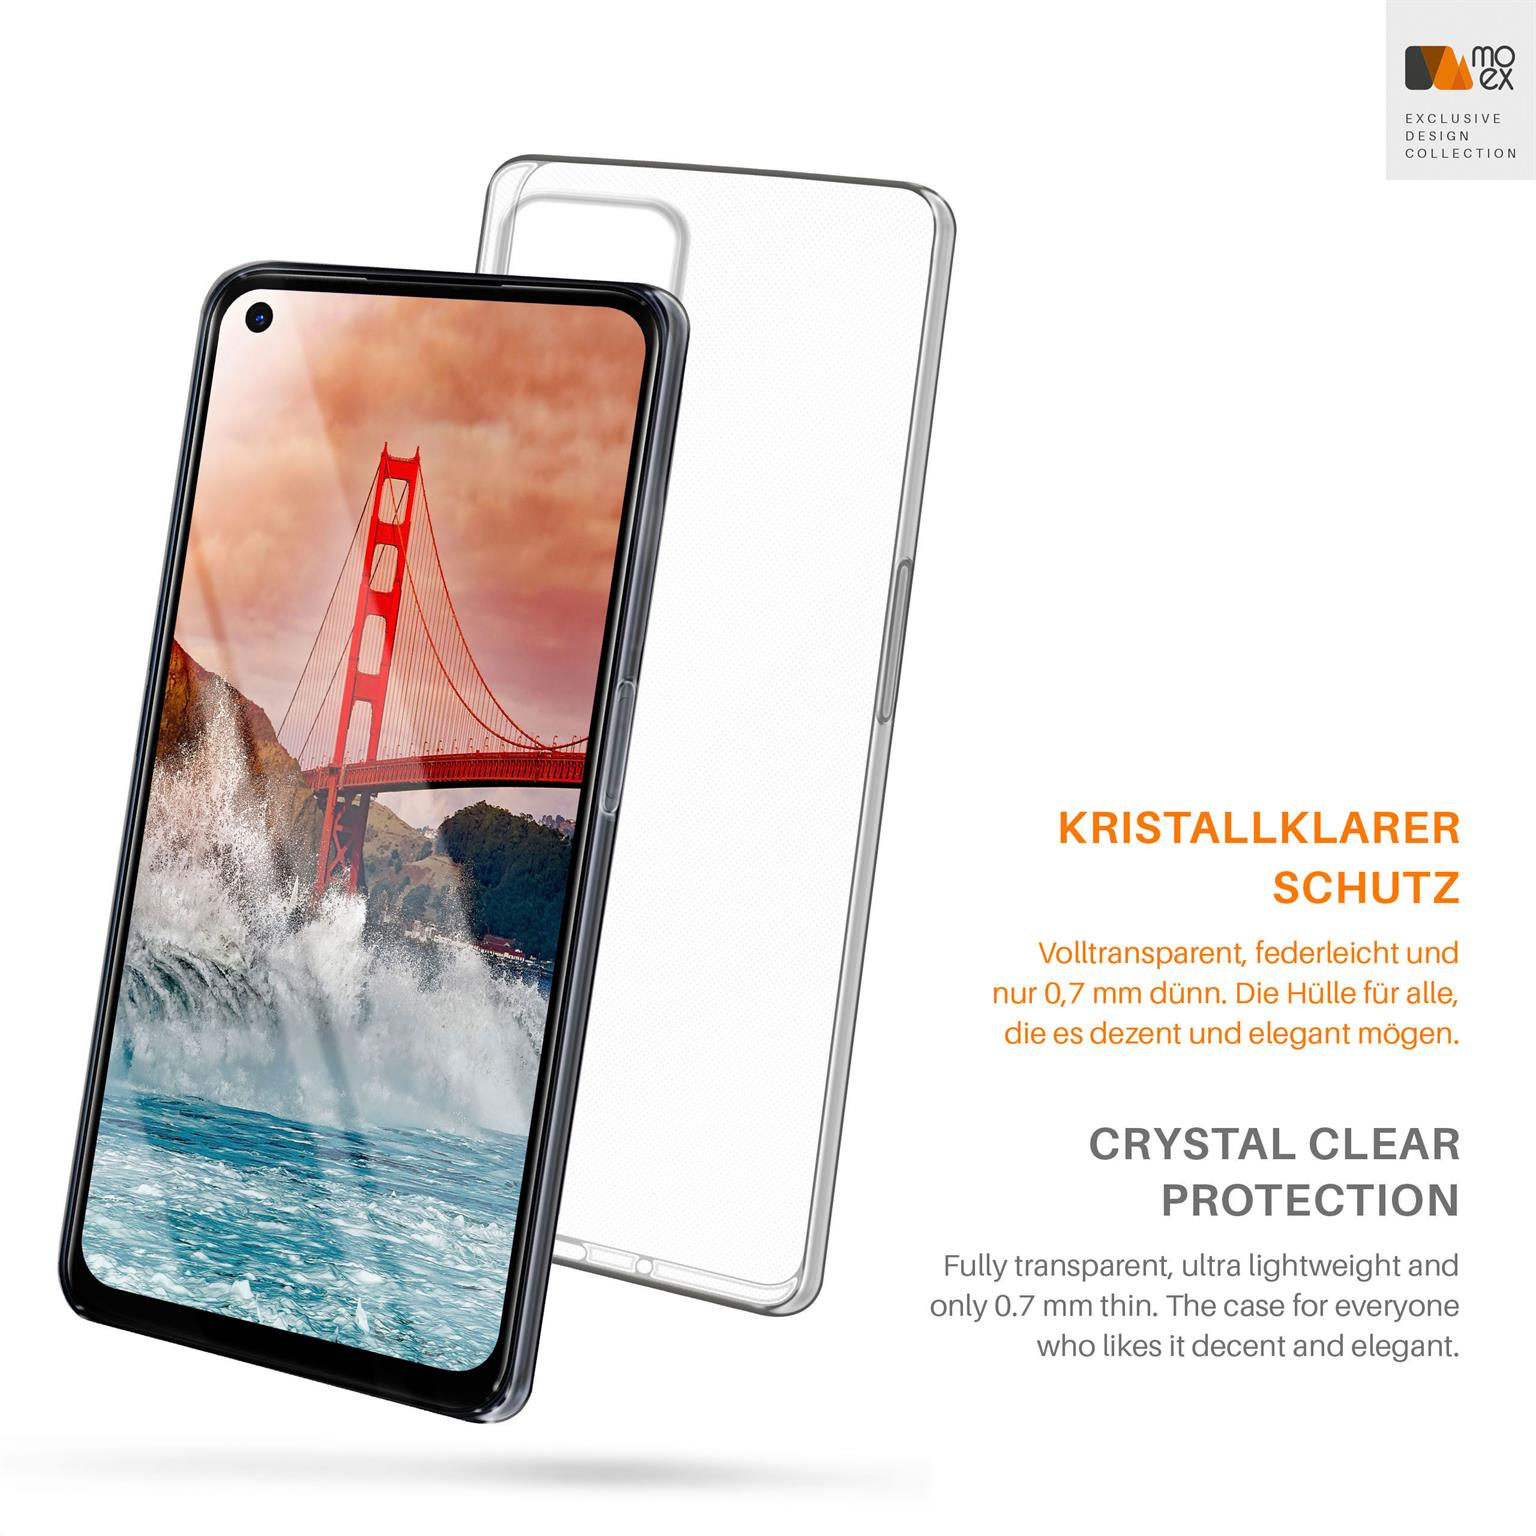 Backcover, 5G, Crystal-Clear Aero A73 Case, MOEX Oppo,